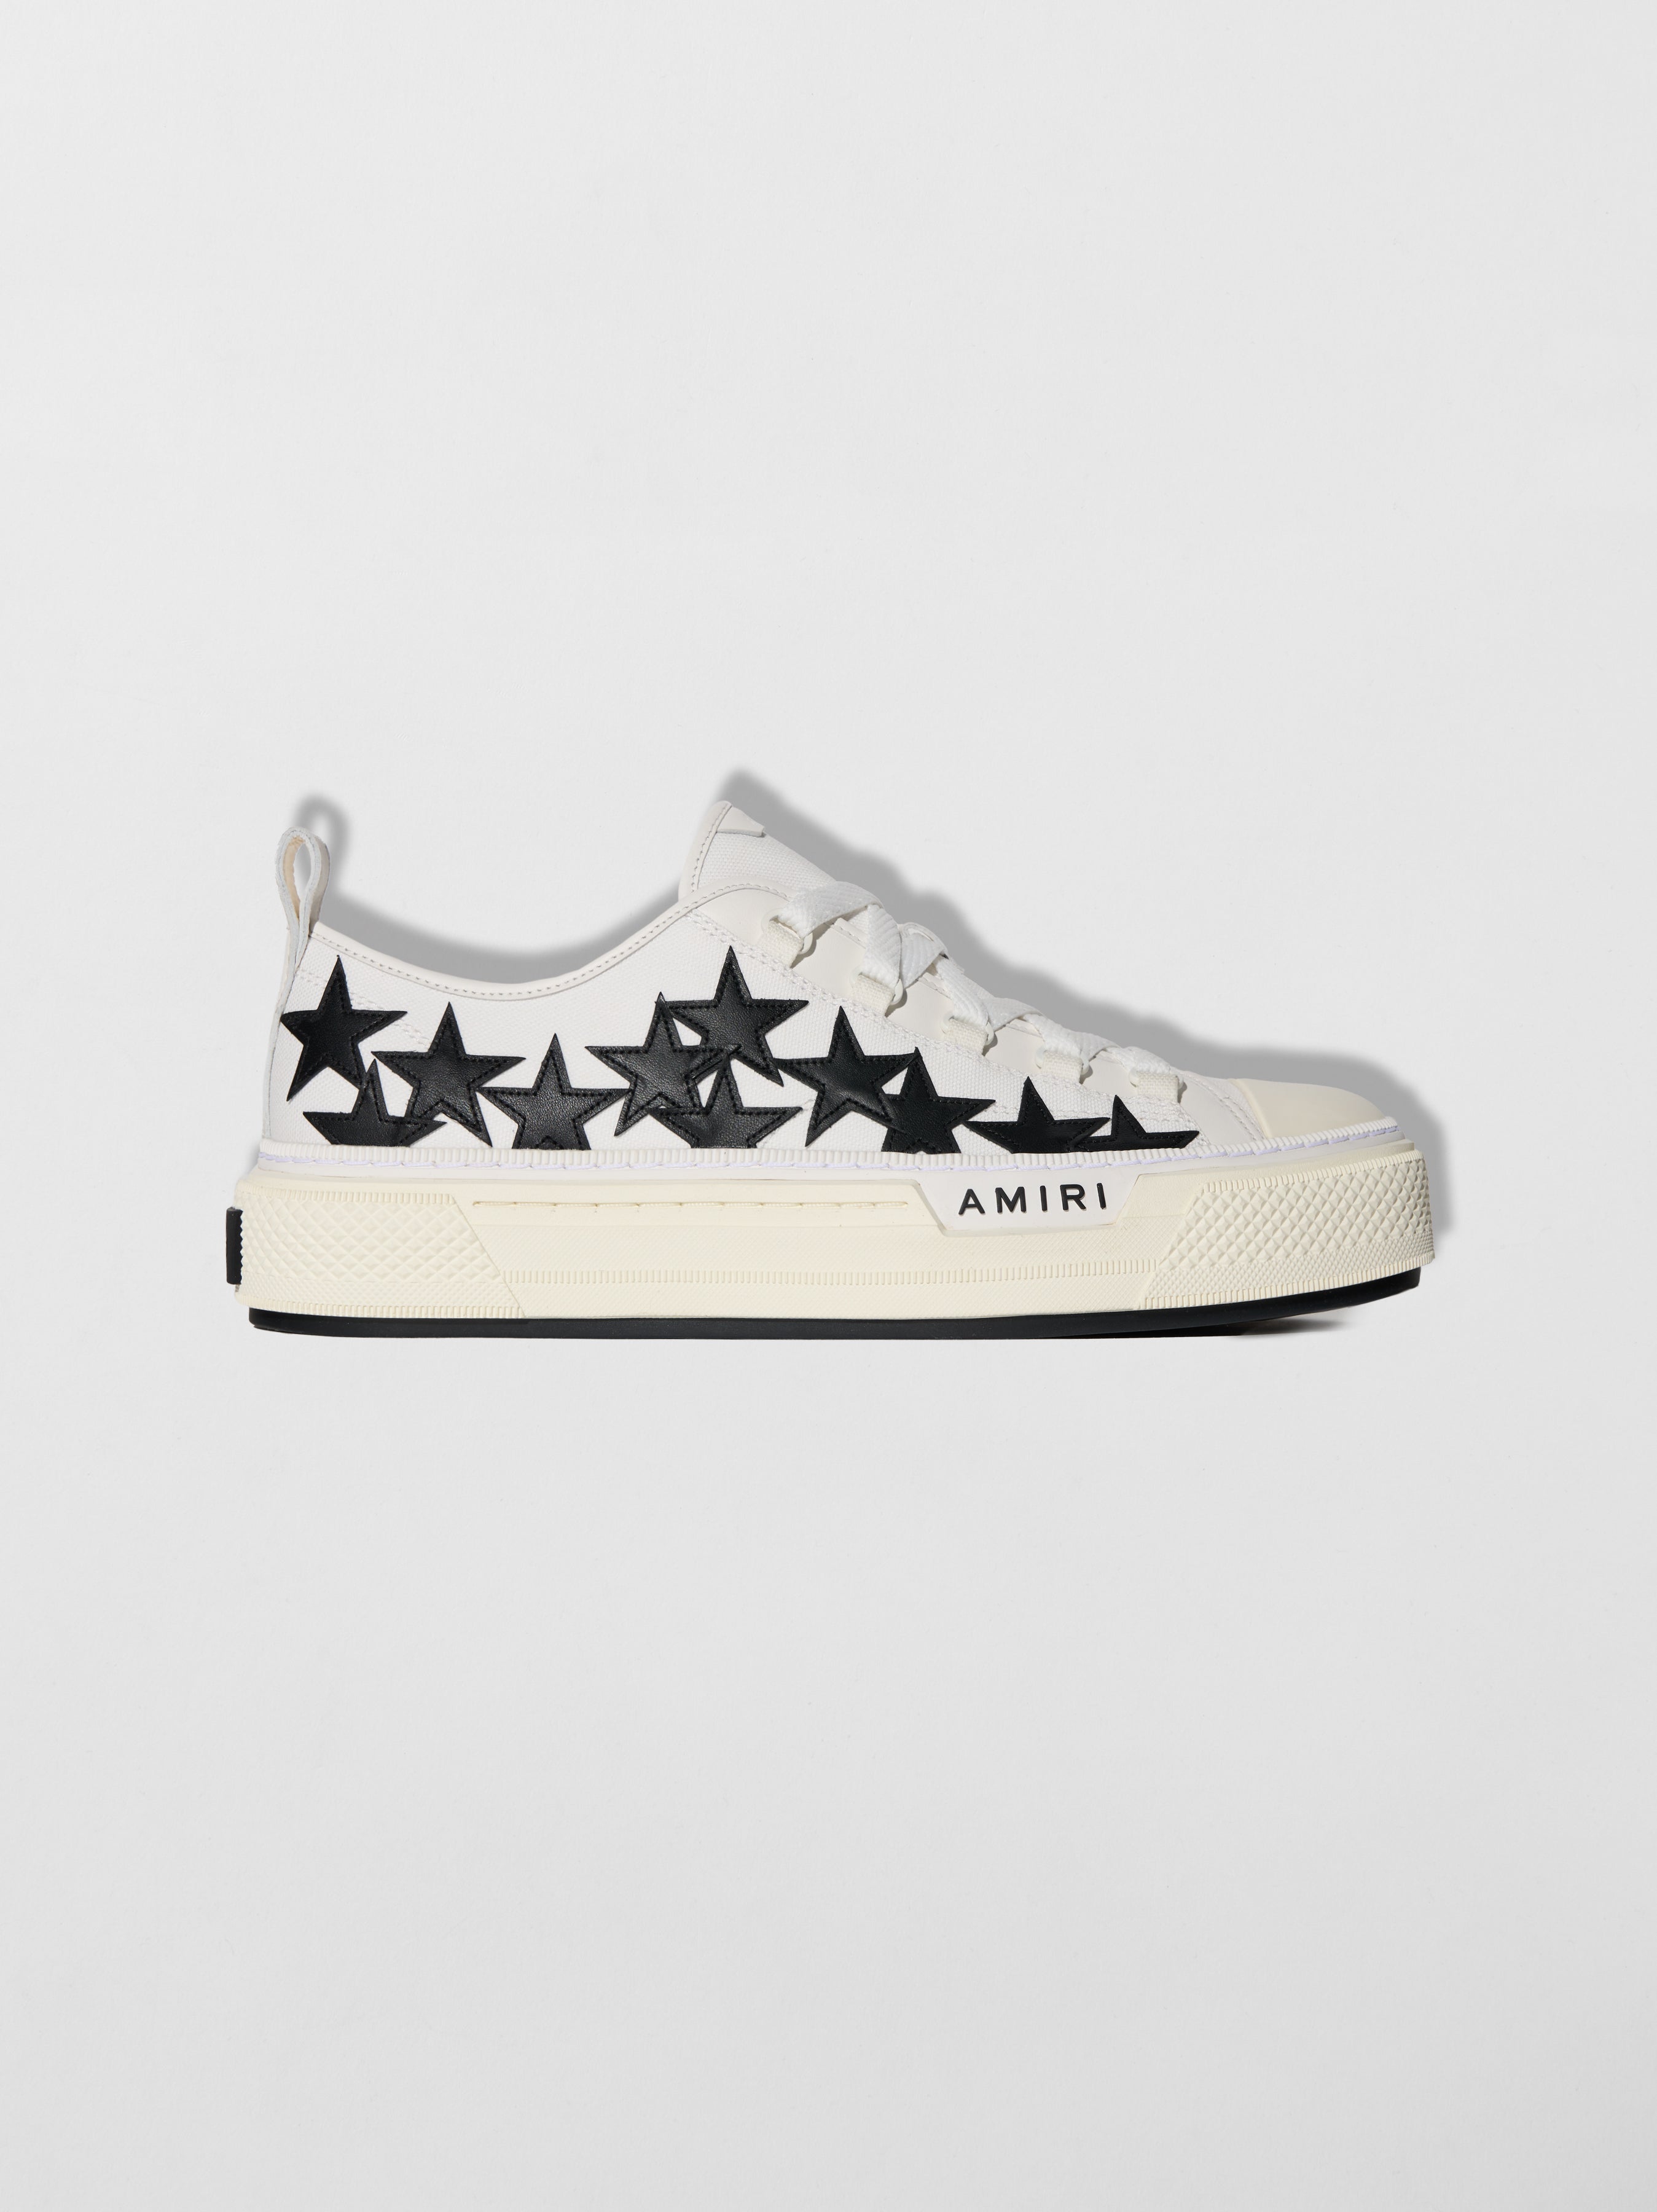 Product WOMEN - STARS COURT LOW - WHITE/BLACK featured image